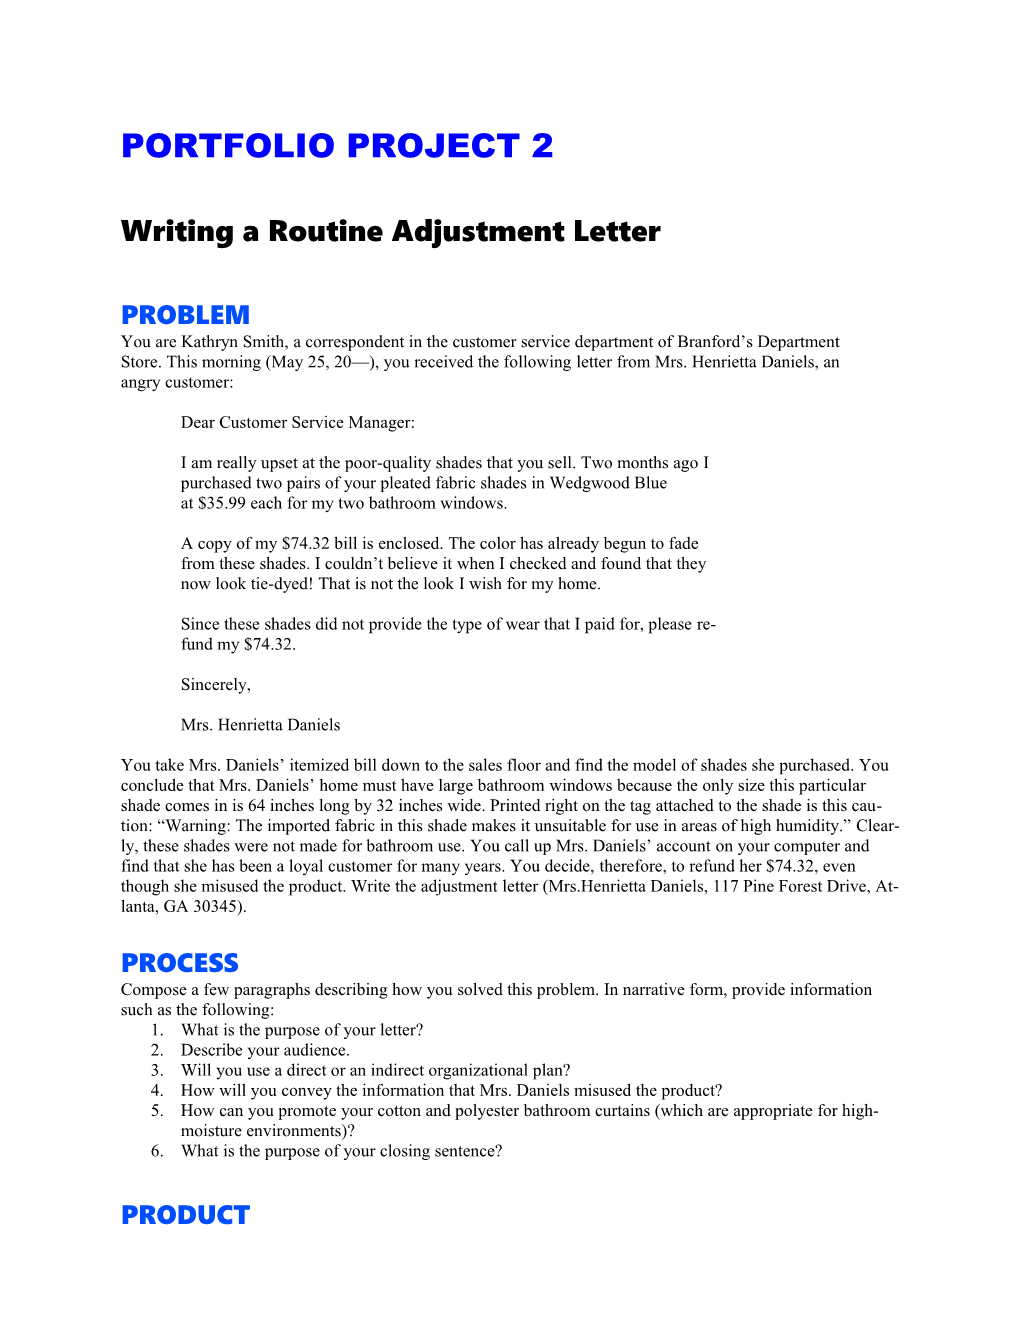 Writing a Routine Adjustment Letter